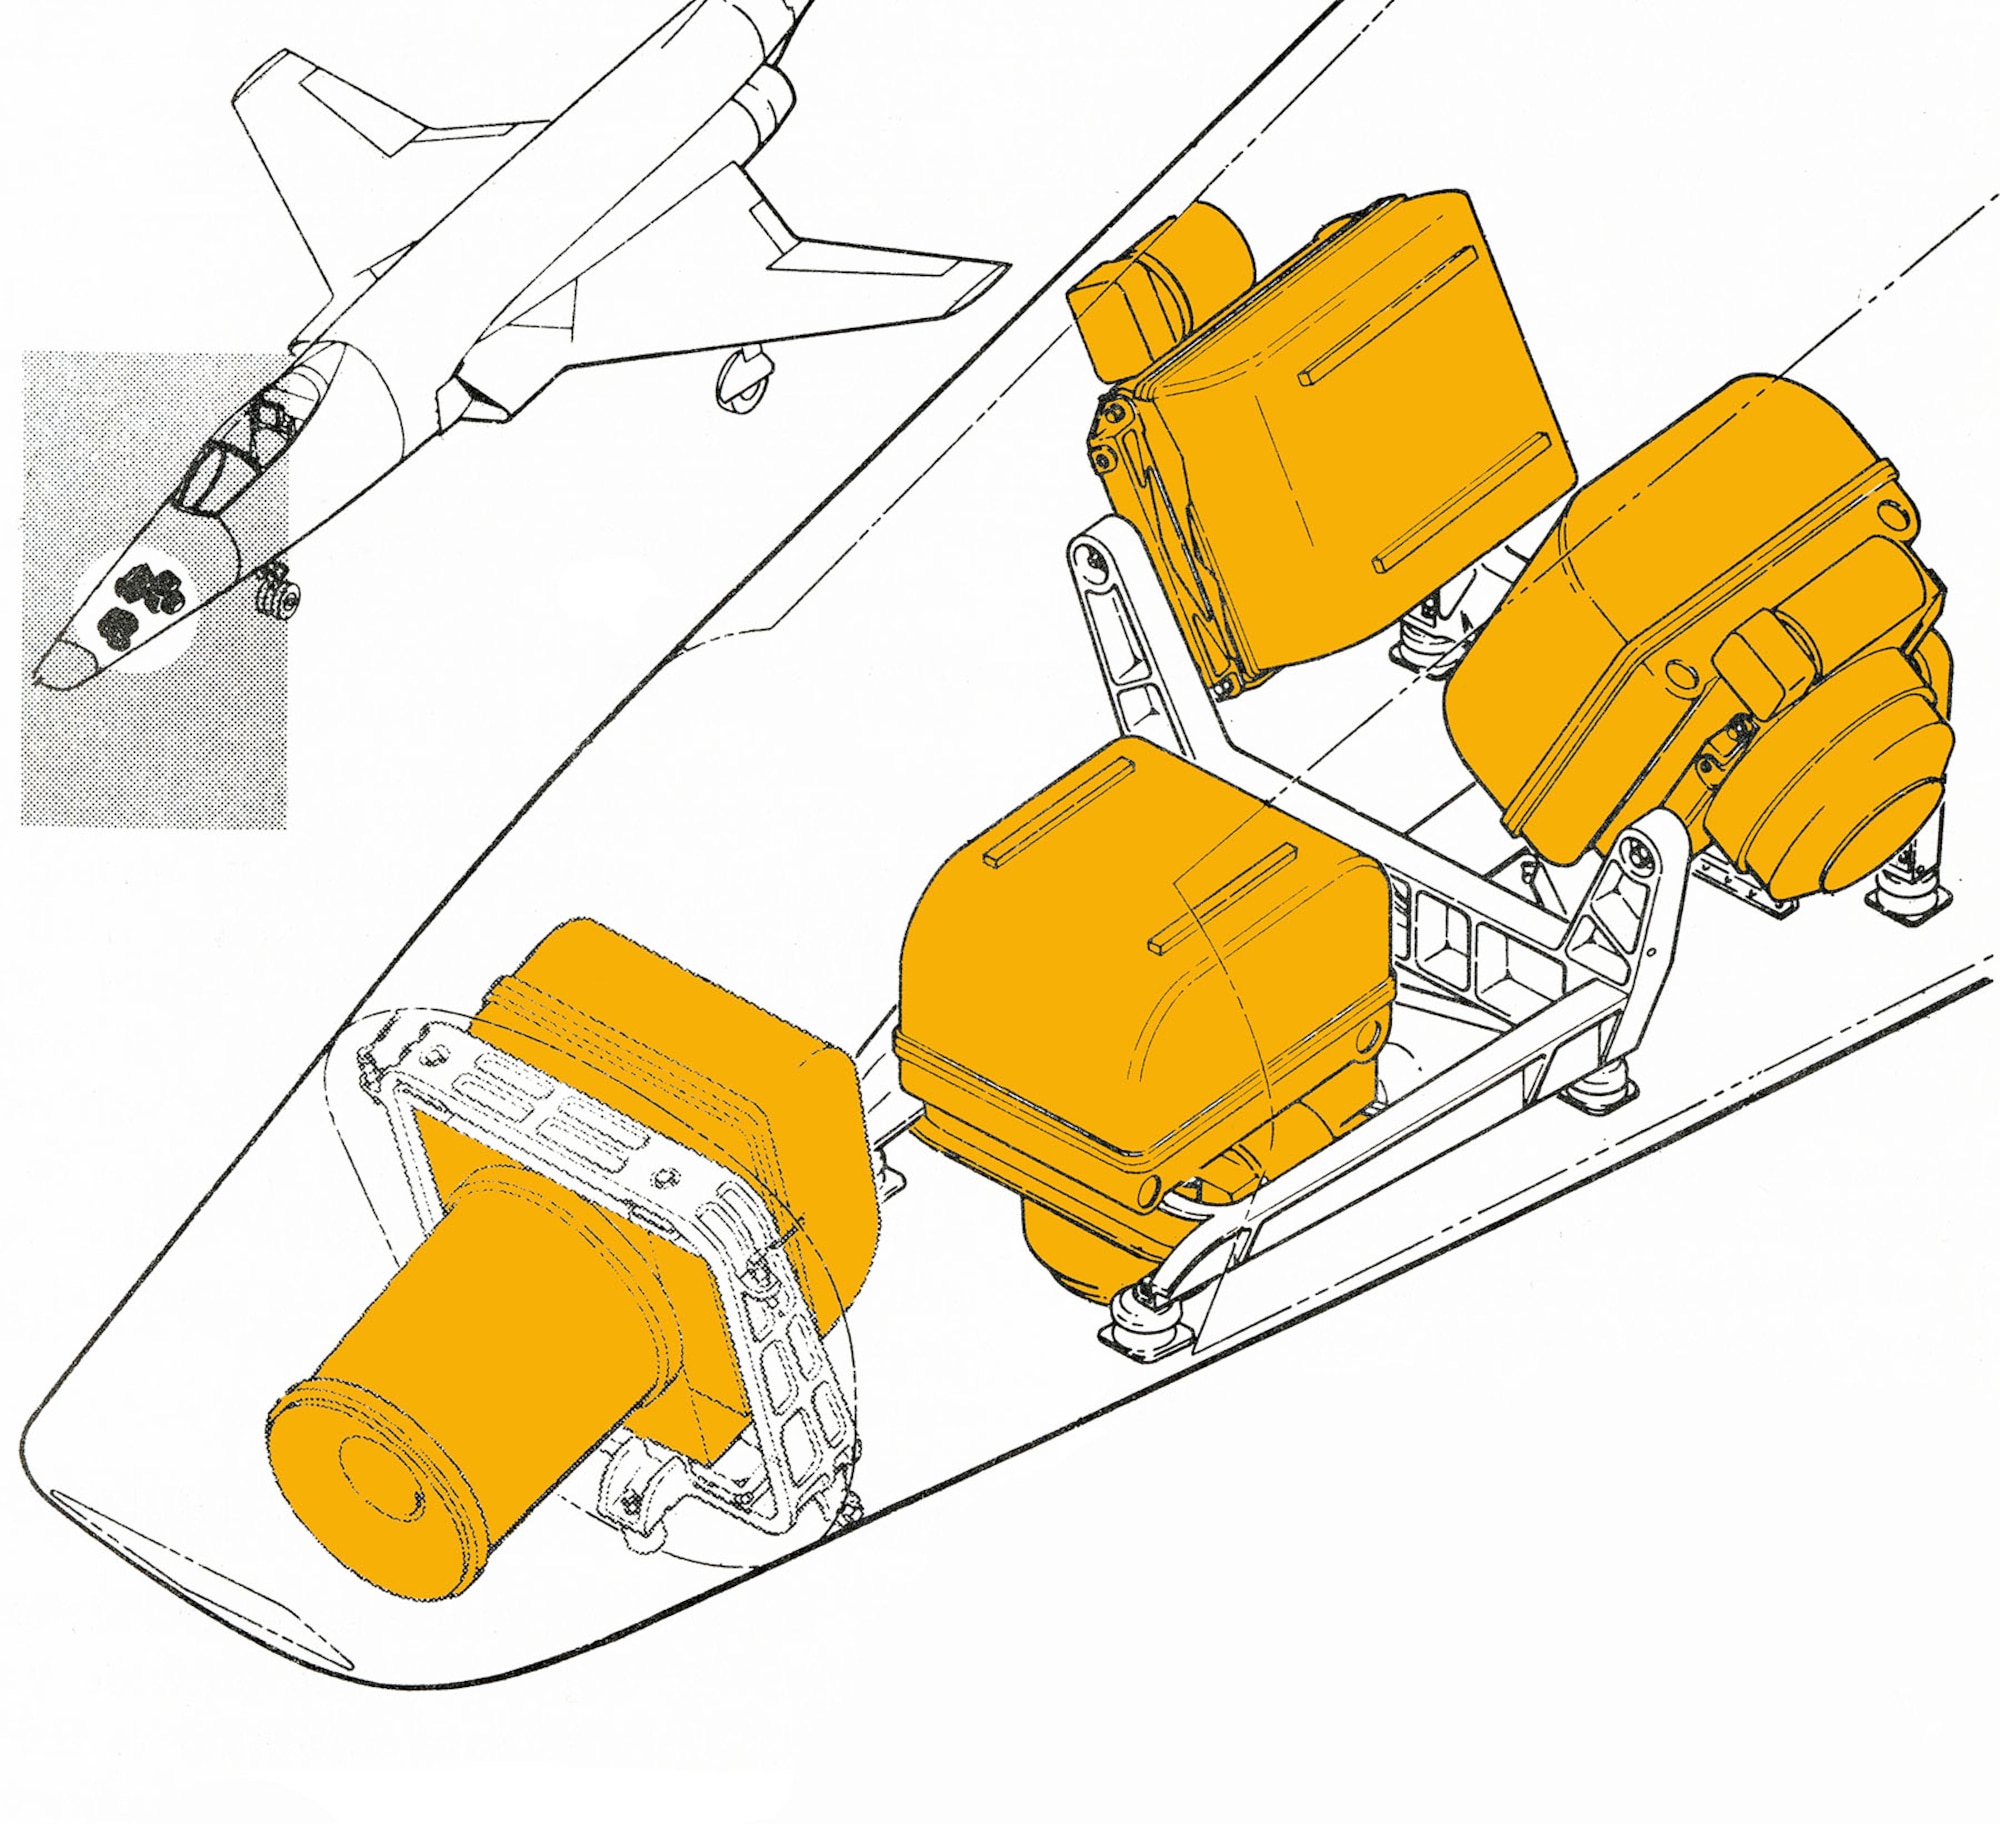 This illustration of an RF-101C camera configuration has four KA-45 cameras with various lenses -- one pointed forward, one pointed straight down, and two angled to the side (called oblique).